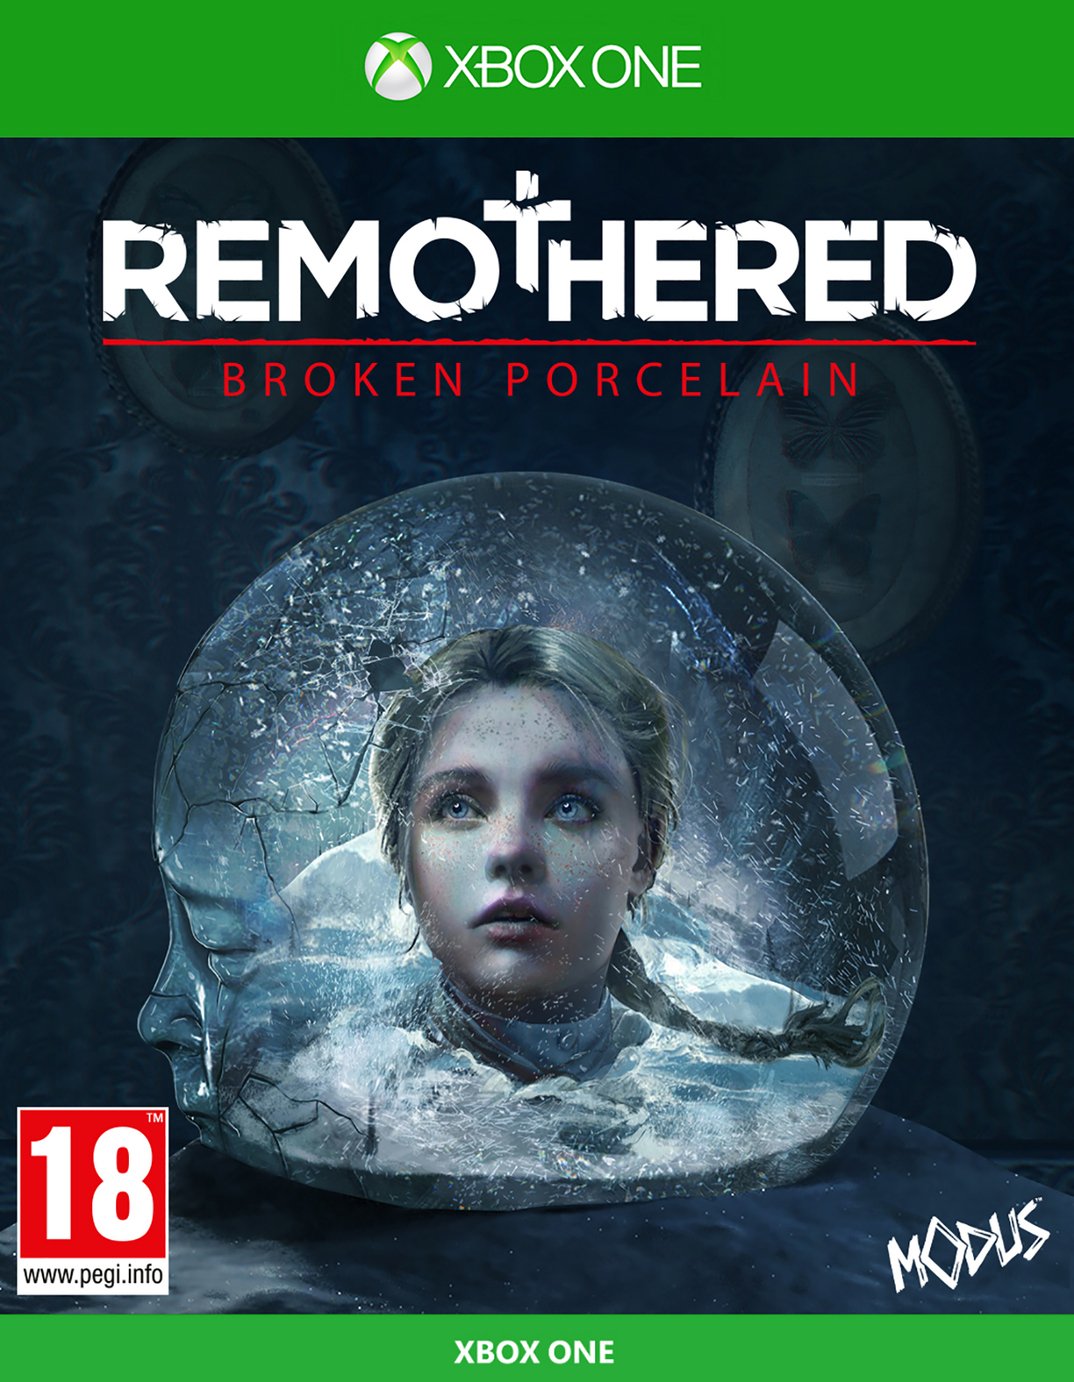 Remothered Broken Porcelain Xbox One PreOrder Game Reviews Updated